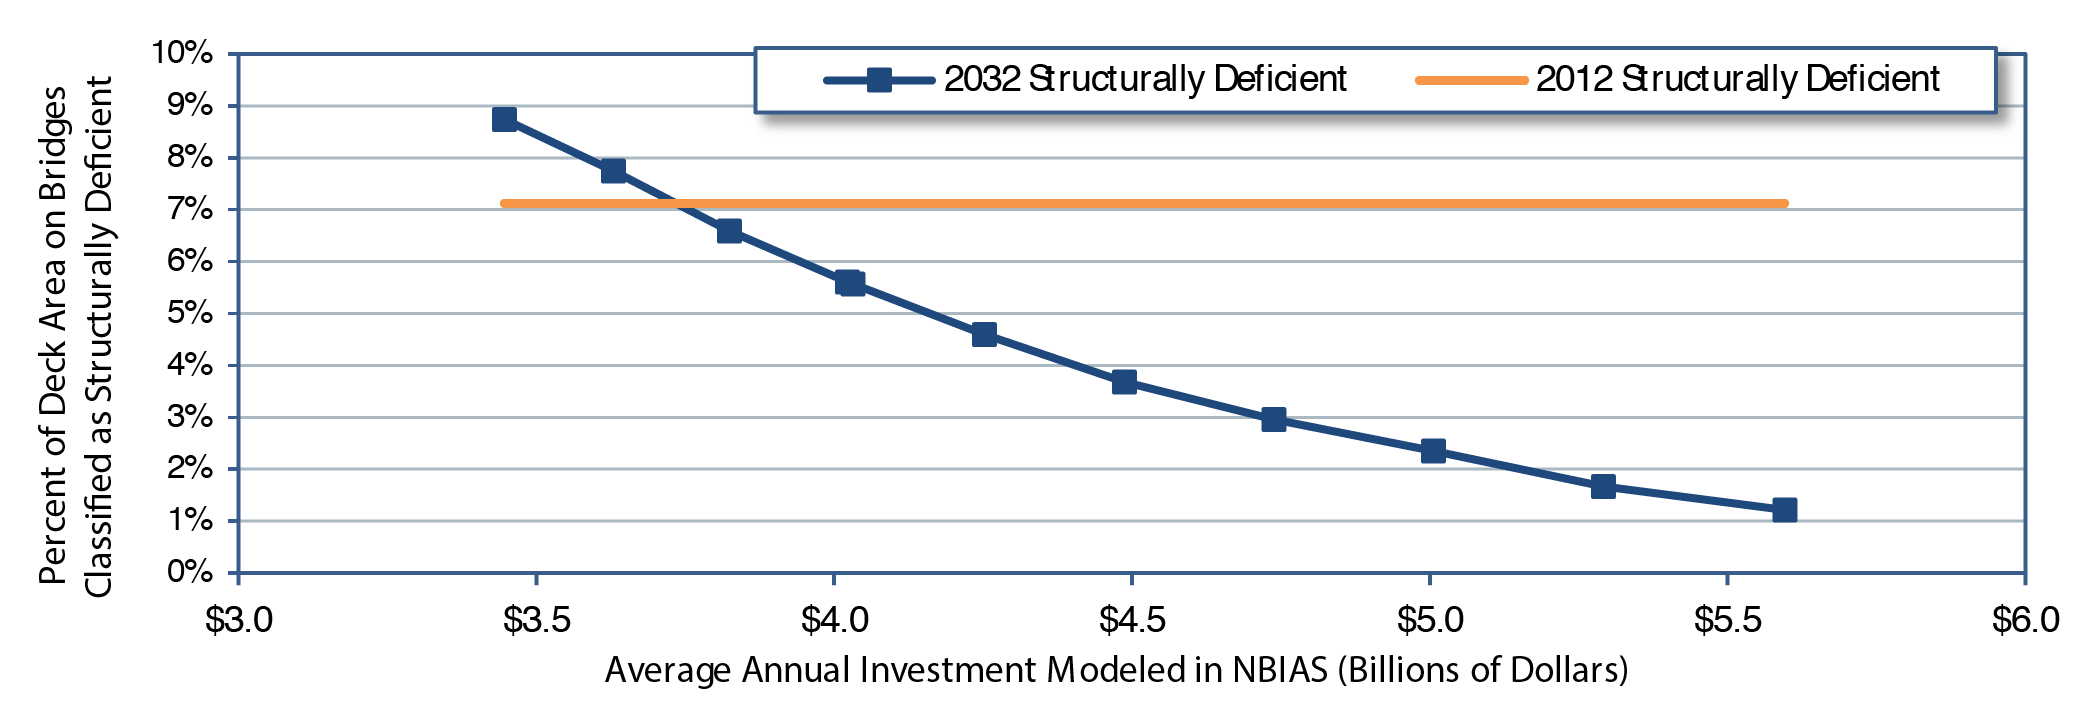 A line graph plots values for percent of deck area on bridges classified as structurally deficient over average annual investment in billions of year 2012 dollars modeled in NBIAS for 2012 and 2032. While the line for 2012 structurally deficient bridges remains at 7.1 percent from $3.4 billion to $5.6 billion, the plot for 2032 structurally deficient bridges has an initial value of 8.7 percent at an annual investment of $3.4 billion and curves smoothly downward to a value of 5.6 percent at an annual investment of $4.0 billion. Continuing downward, the plot reaches a value of 3.0 percent at an annual investment of $4.7 billion, ending at a value of 1.2 percent at an annual investment of $5.6 billion. Source: National Bridge Investment Analysis System.